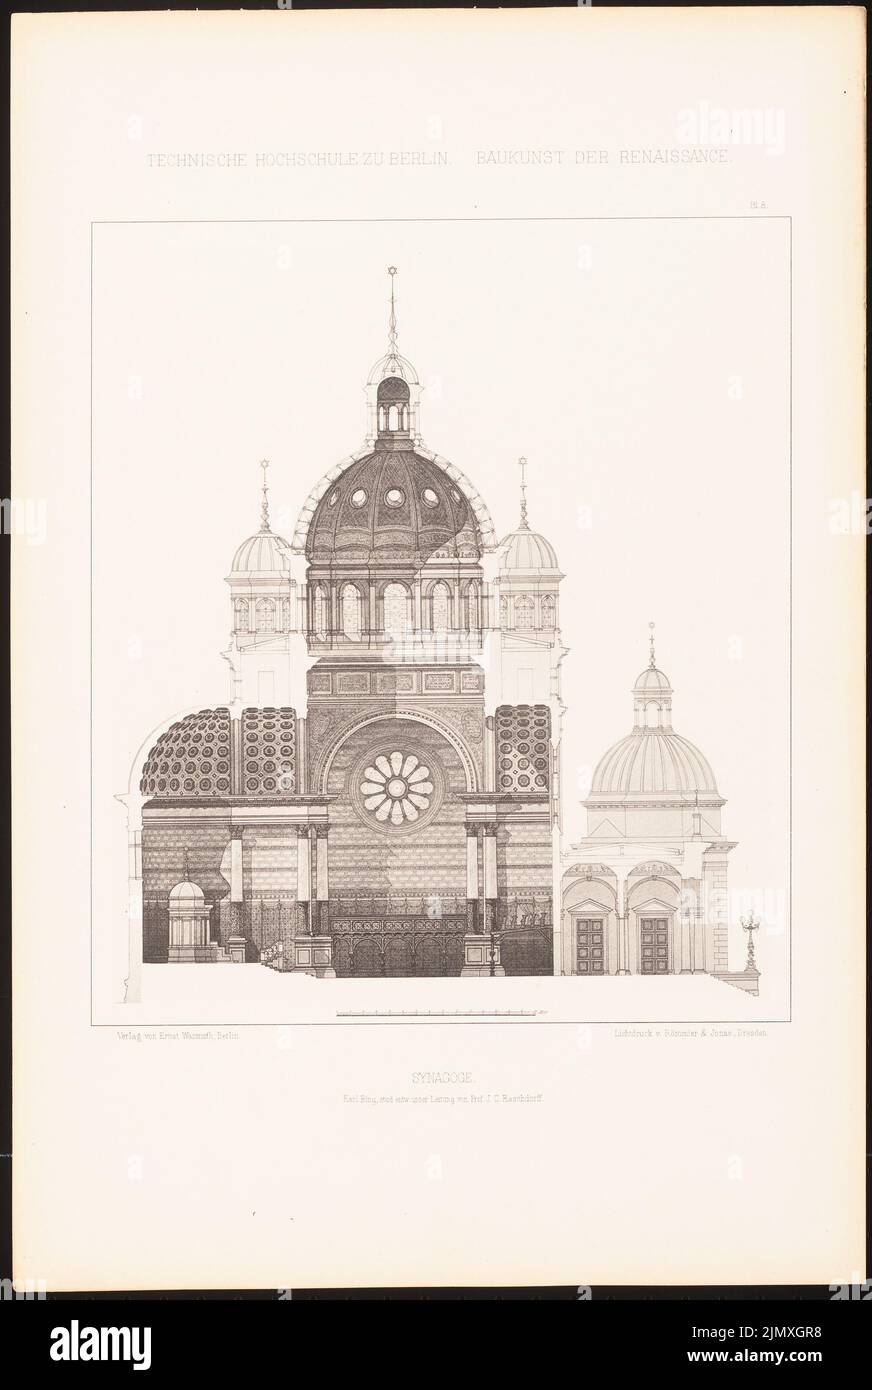 Bing Karl, synagogue. (From: J.C. Raschdorff, architecture of the Renaissance, 1880.) (1880-1880): cross-section. Light pressure on paper, 48.8 x 32.8 cm (including scan edges) Bing Karl : Synagoge. (Aus: J.C. Raschdorff, Baukunst der Renaissance, 1880) Stock Photo